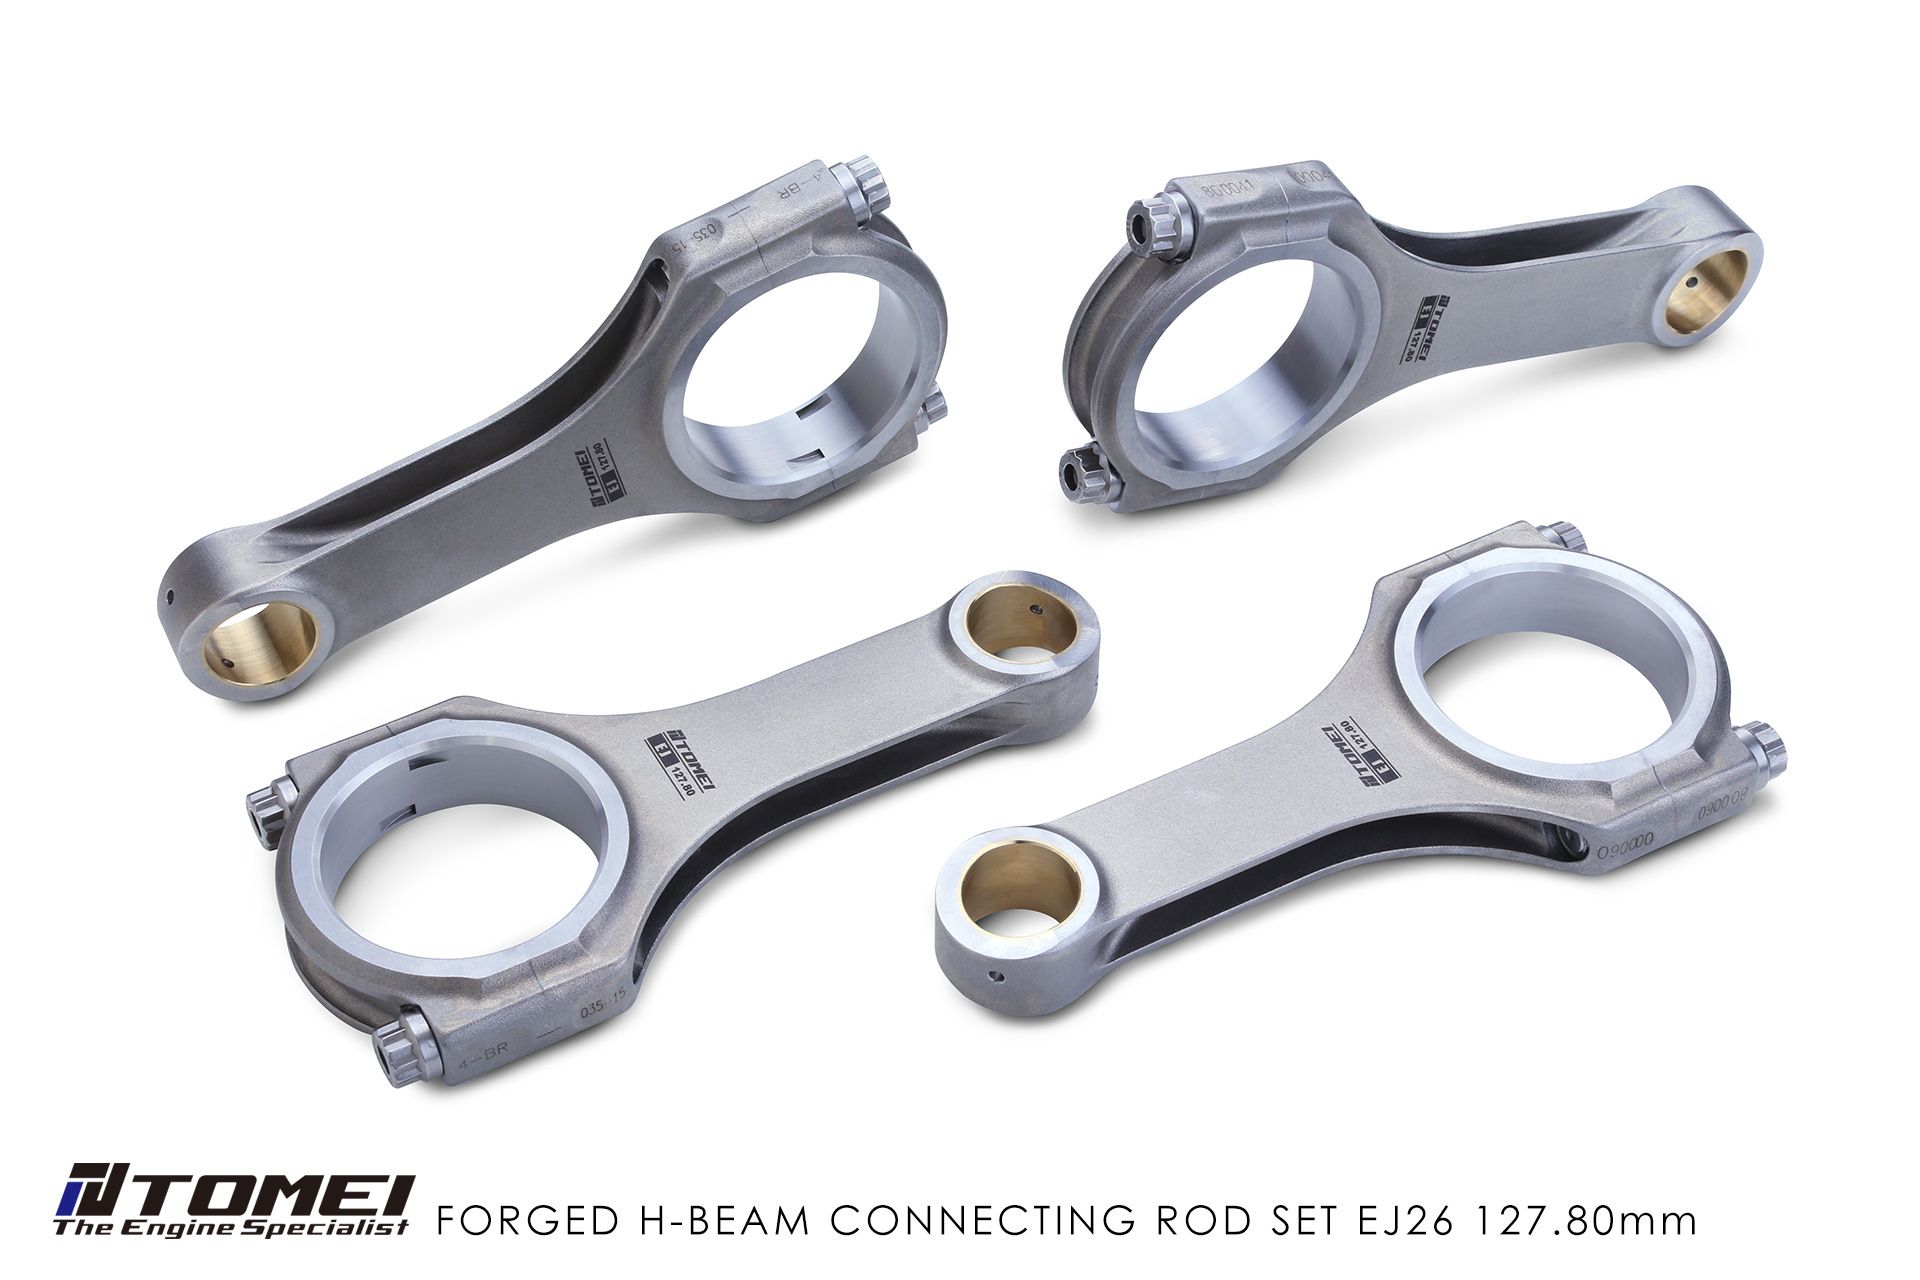 Tomei Forged H-Beam Connecting Rod Set EJ26 127.80mm